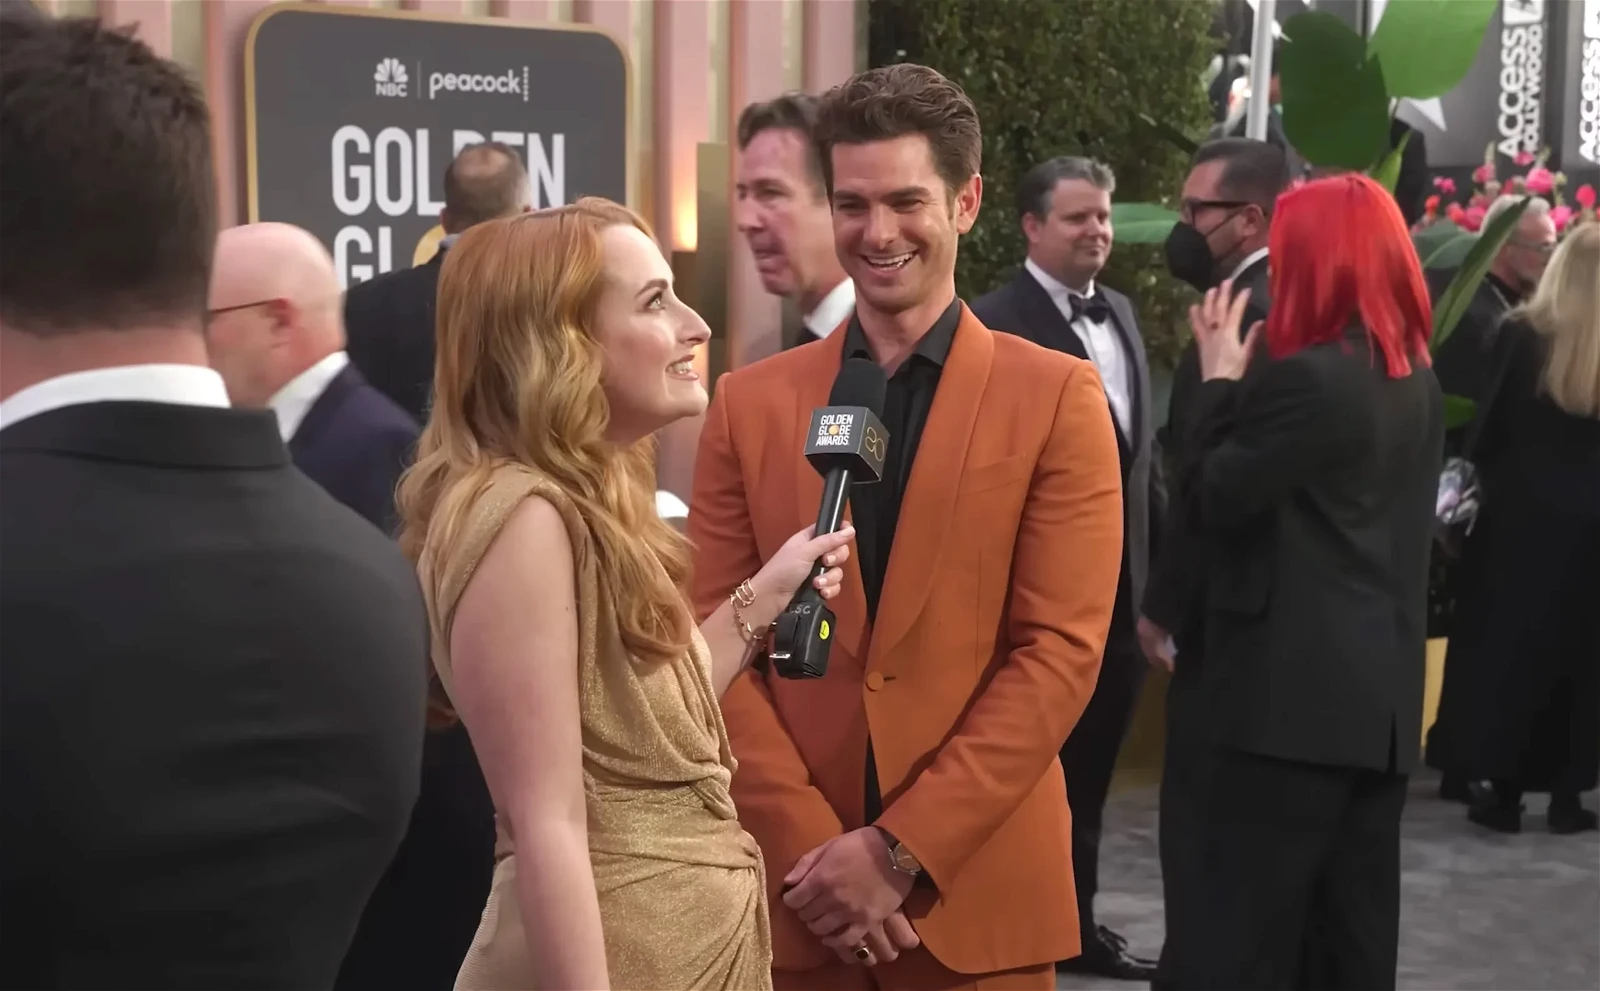 Andrew Garfield and Amelia Dimoldenberg at the Golden Globes red carpet event.